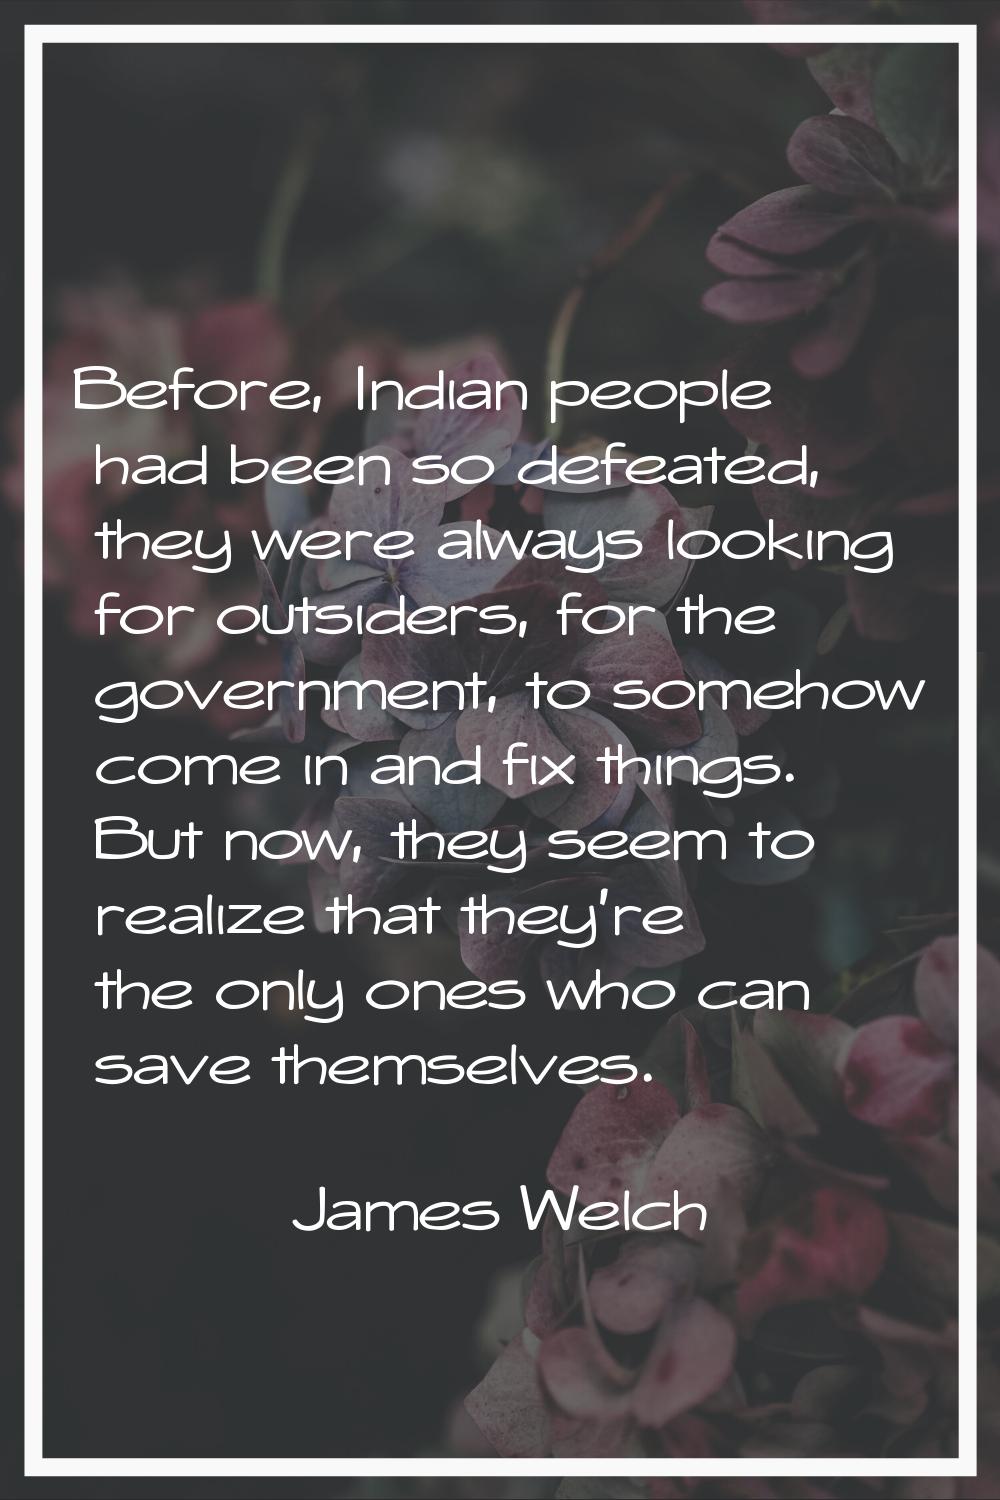 Before, Indian people had been so defeated, they were always looking for outsiders, for the governm